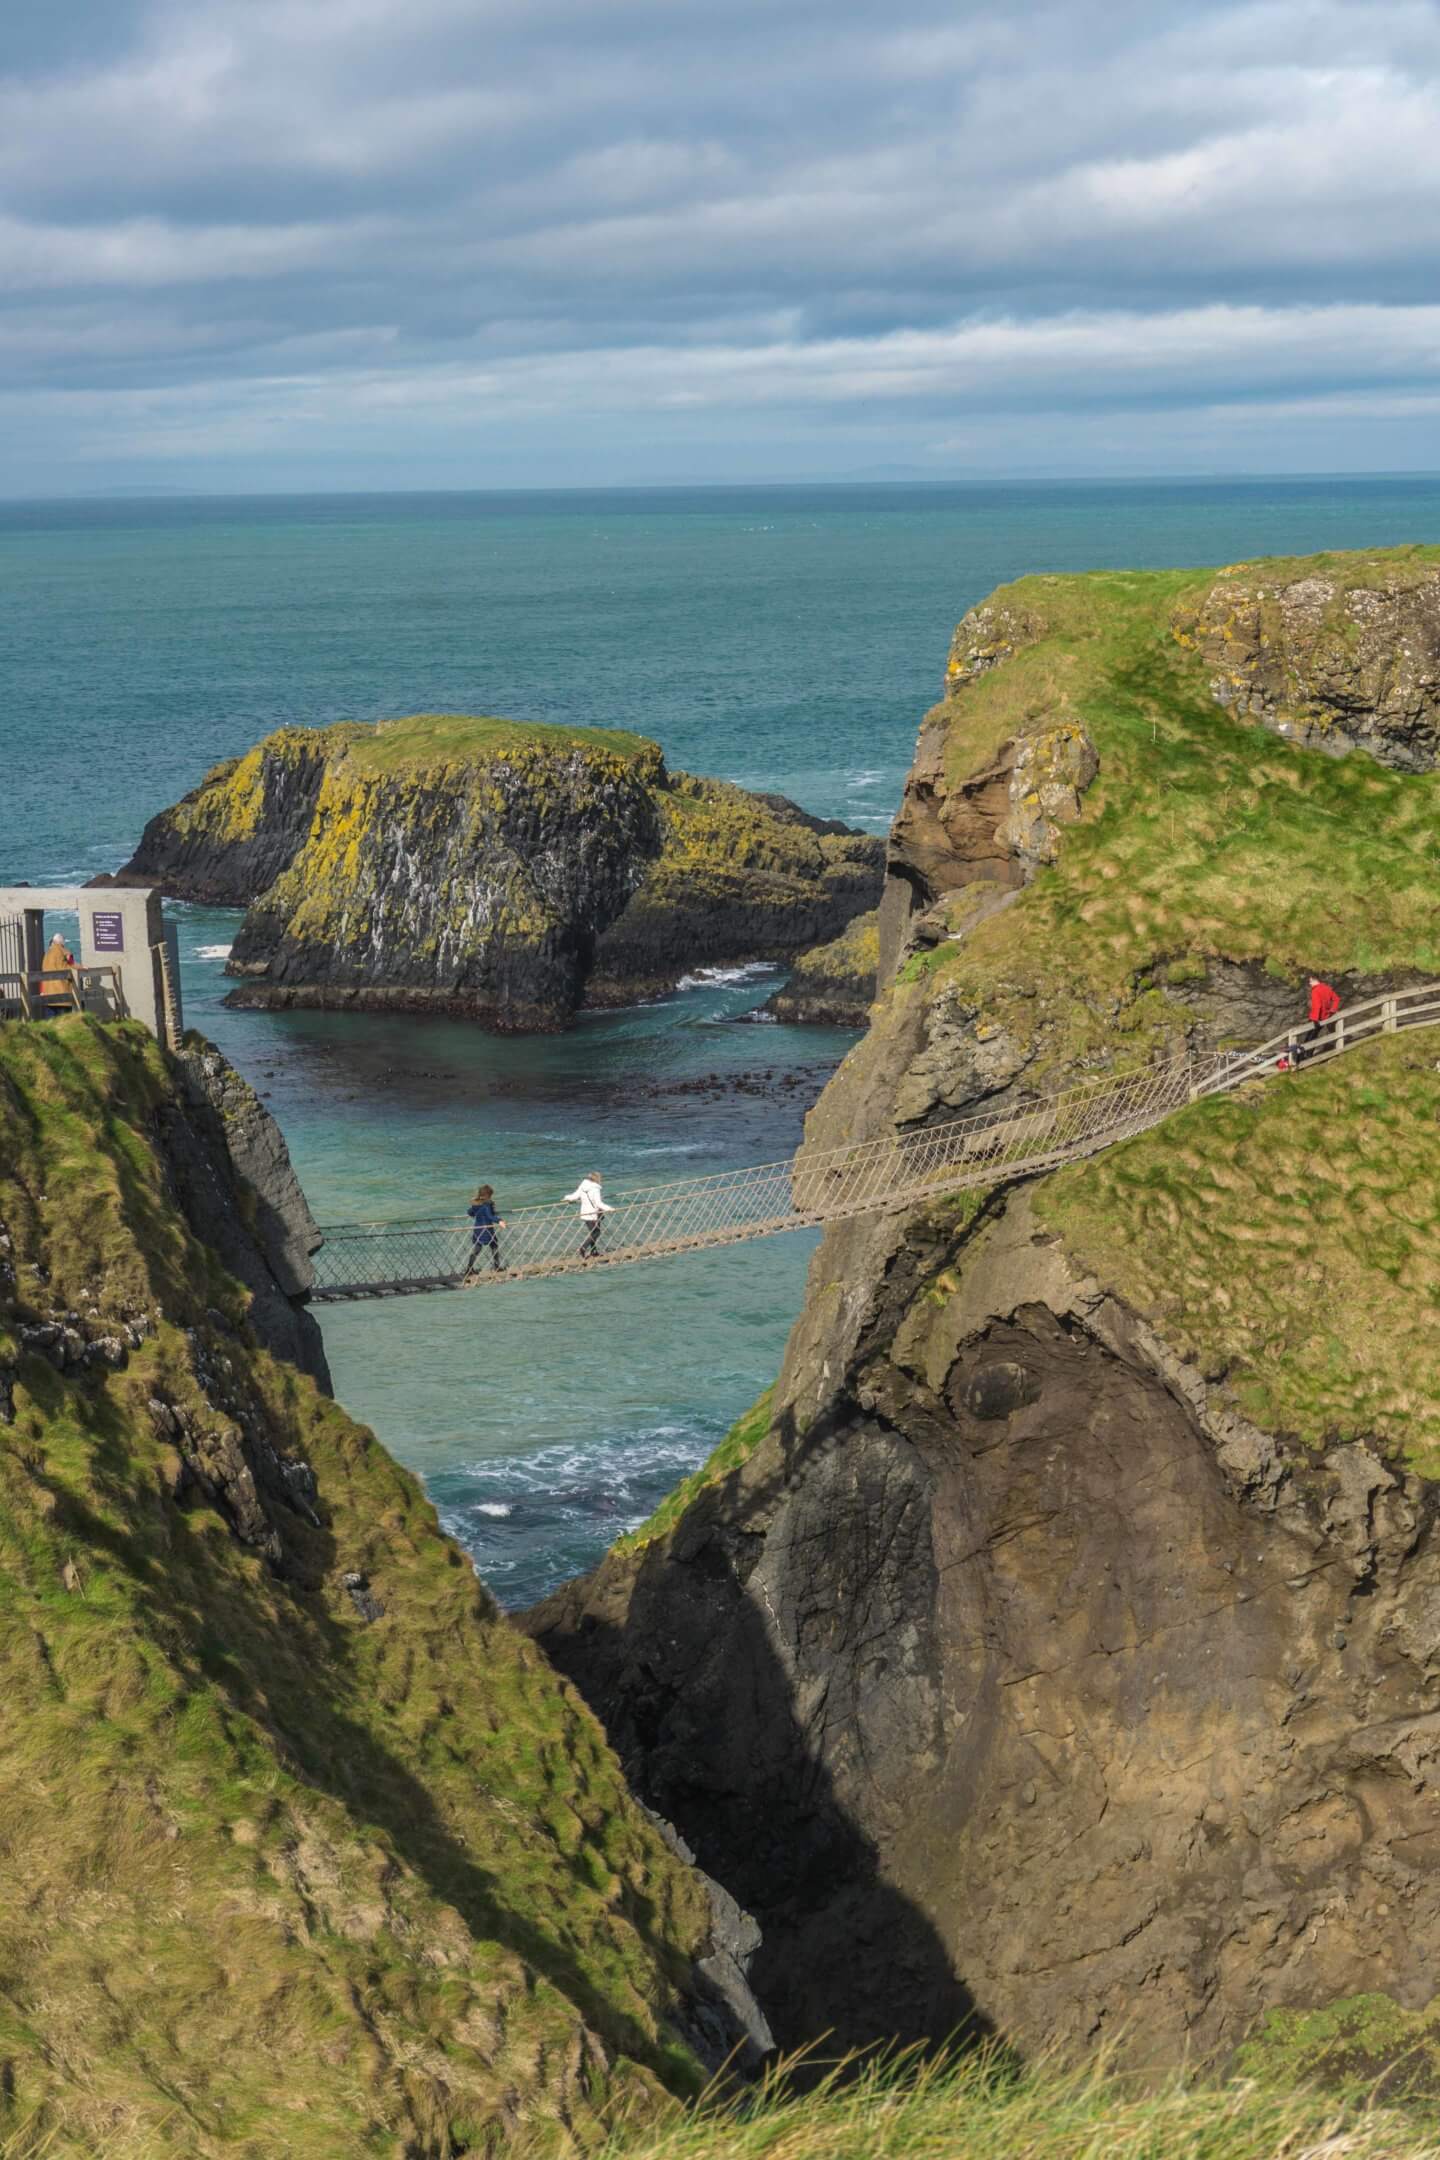 Two people crossing the National Trust Carrick-a-Rede Rope Bridge